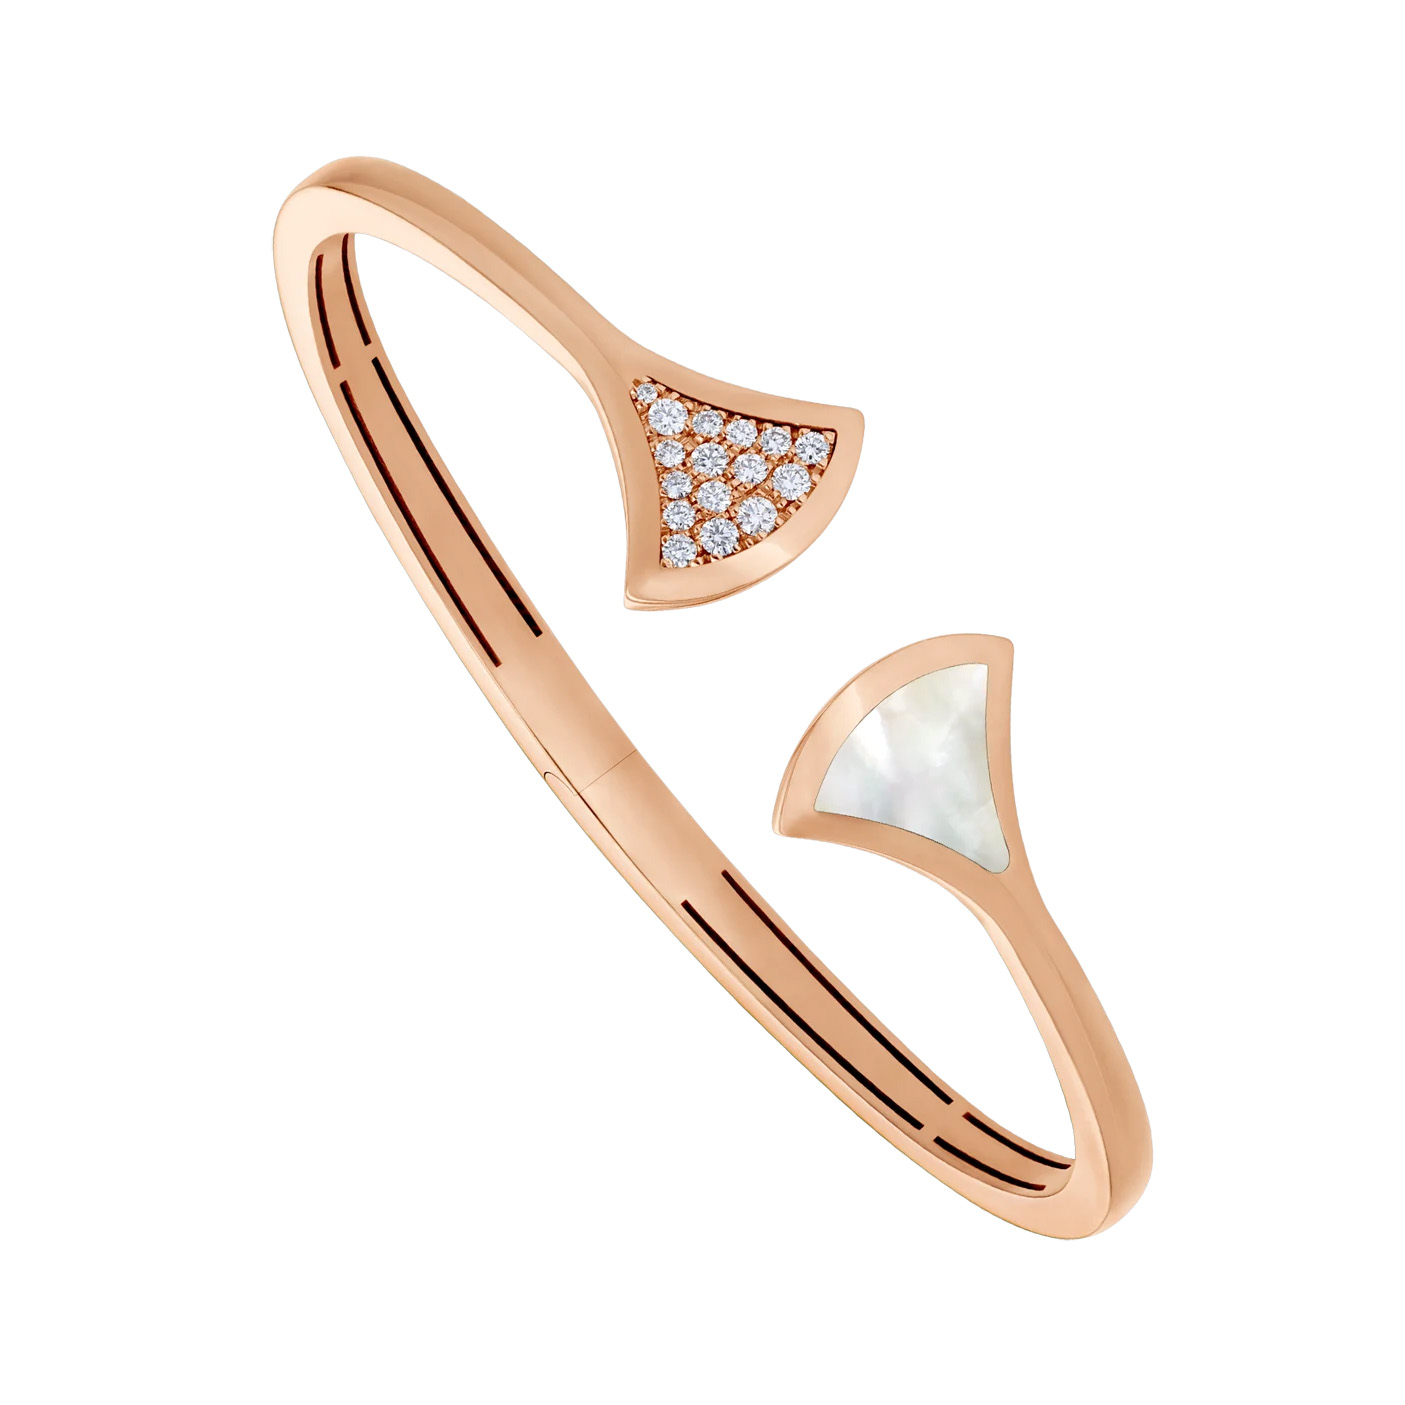 Wholesale OEM design 18 kt OEM/ODM Jewelry rose gold filled bangle bracelet set with a mother of pearl element custom jewelry manufacturers china